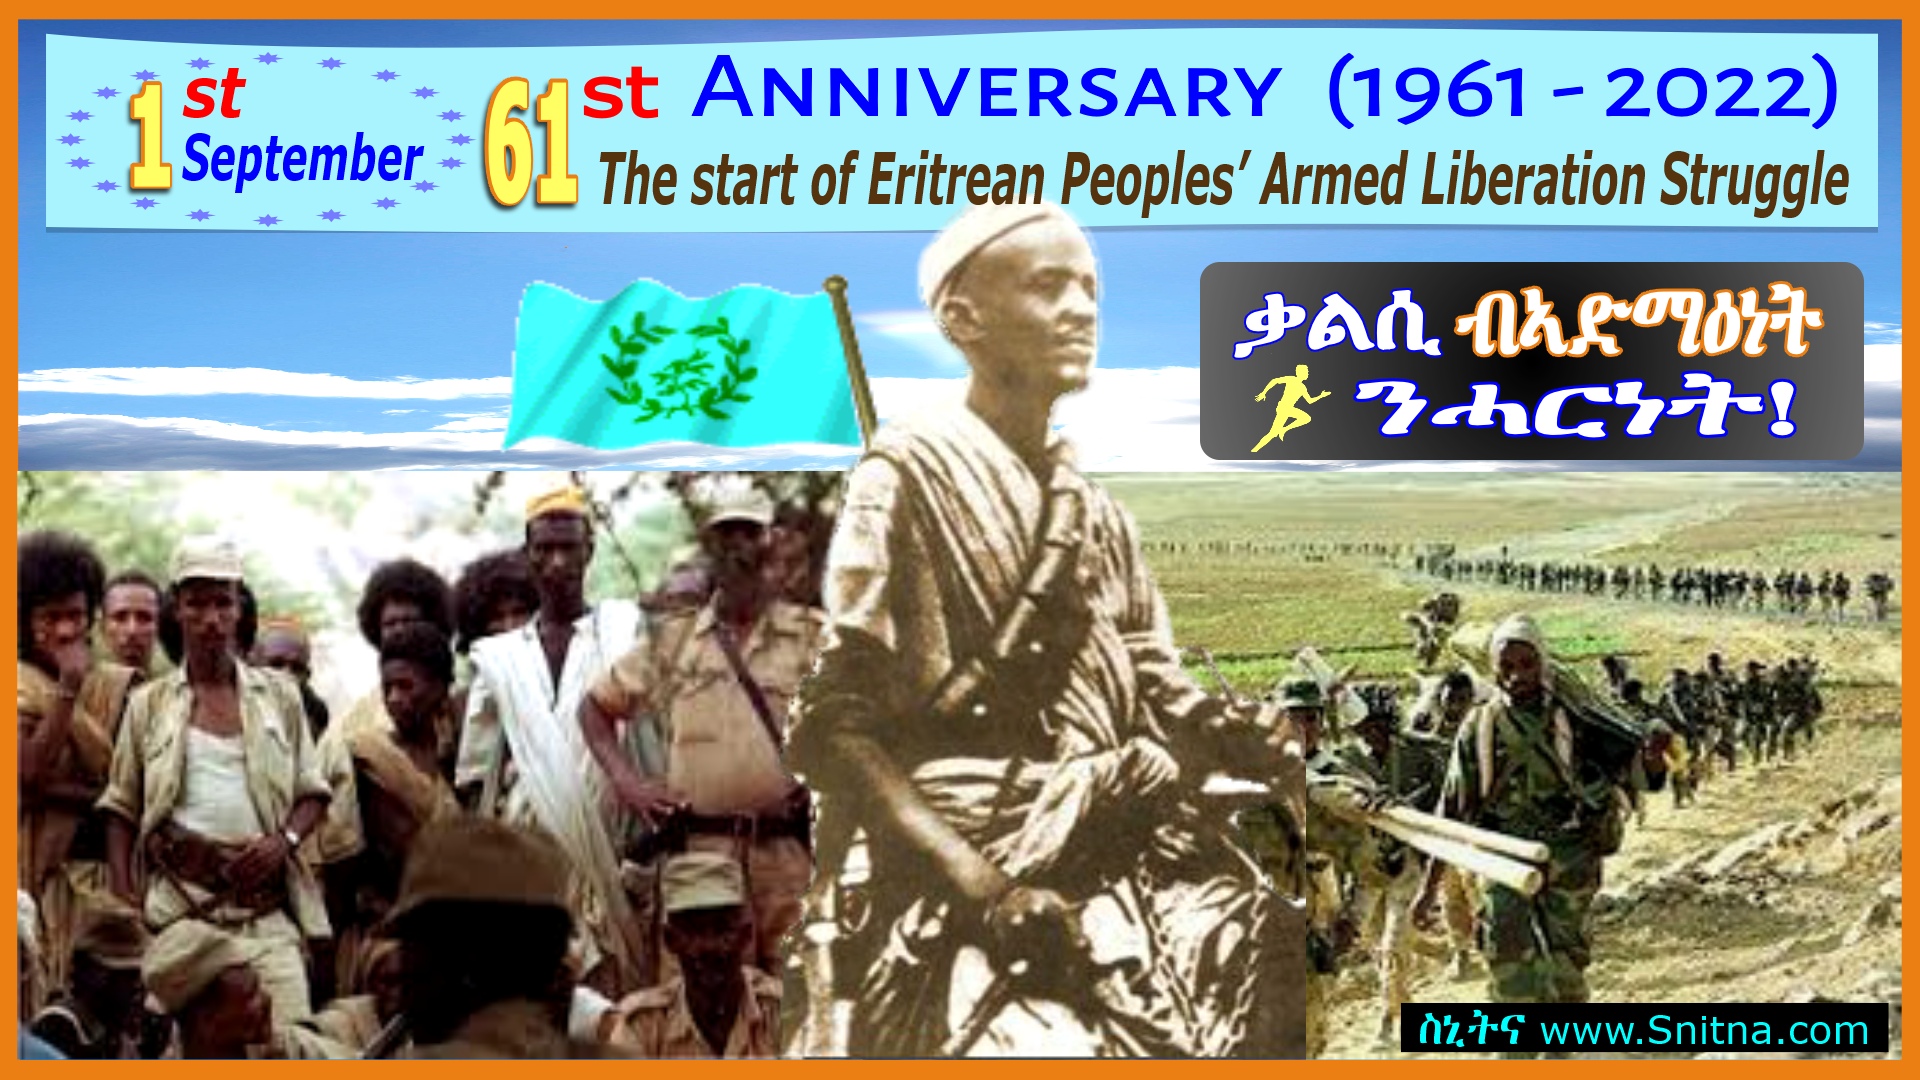 61st Anniversary of the Start of eritrean peoples Armed liberation struggle, 1st September 1961.